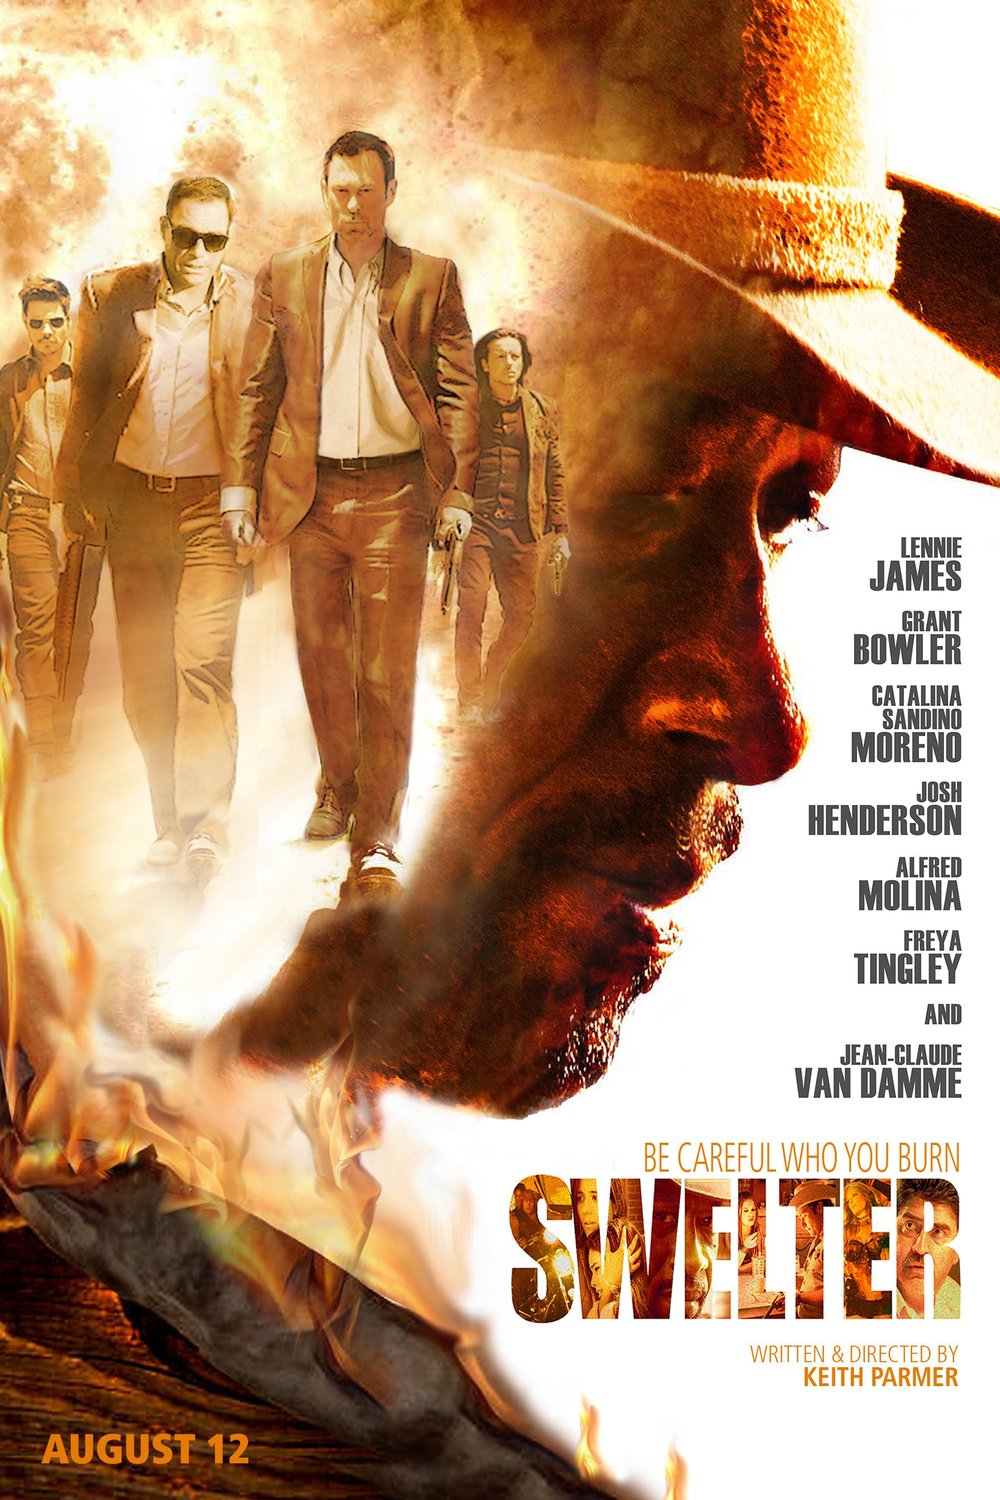 Poster of the movie Swelter